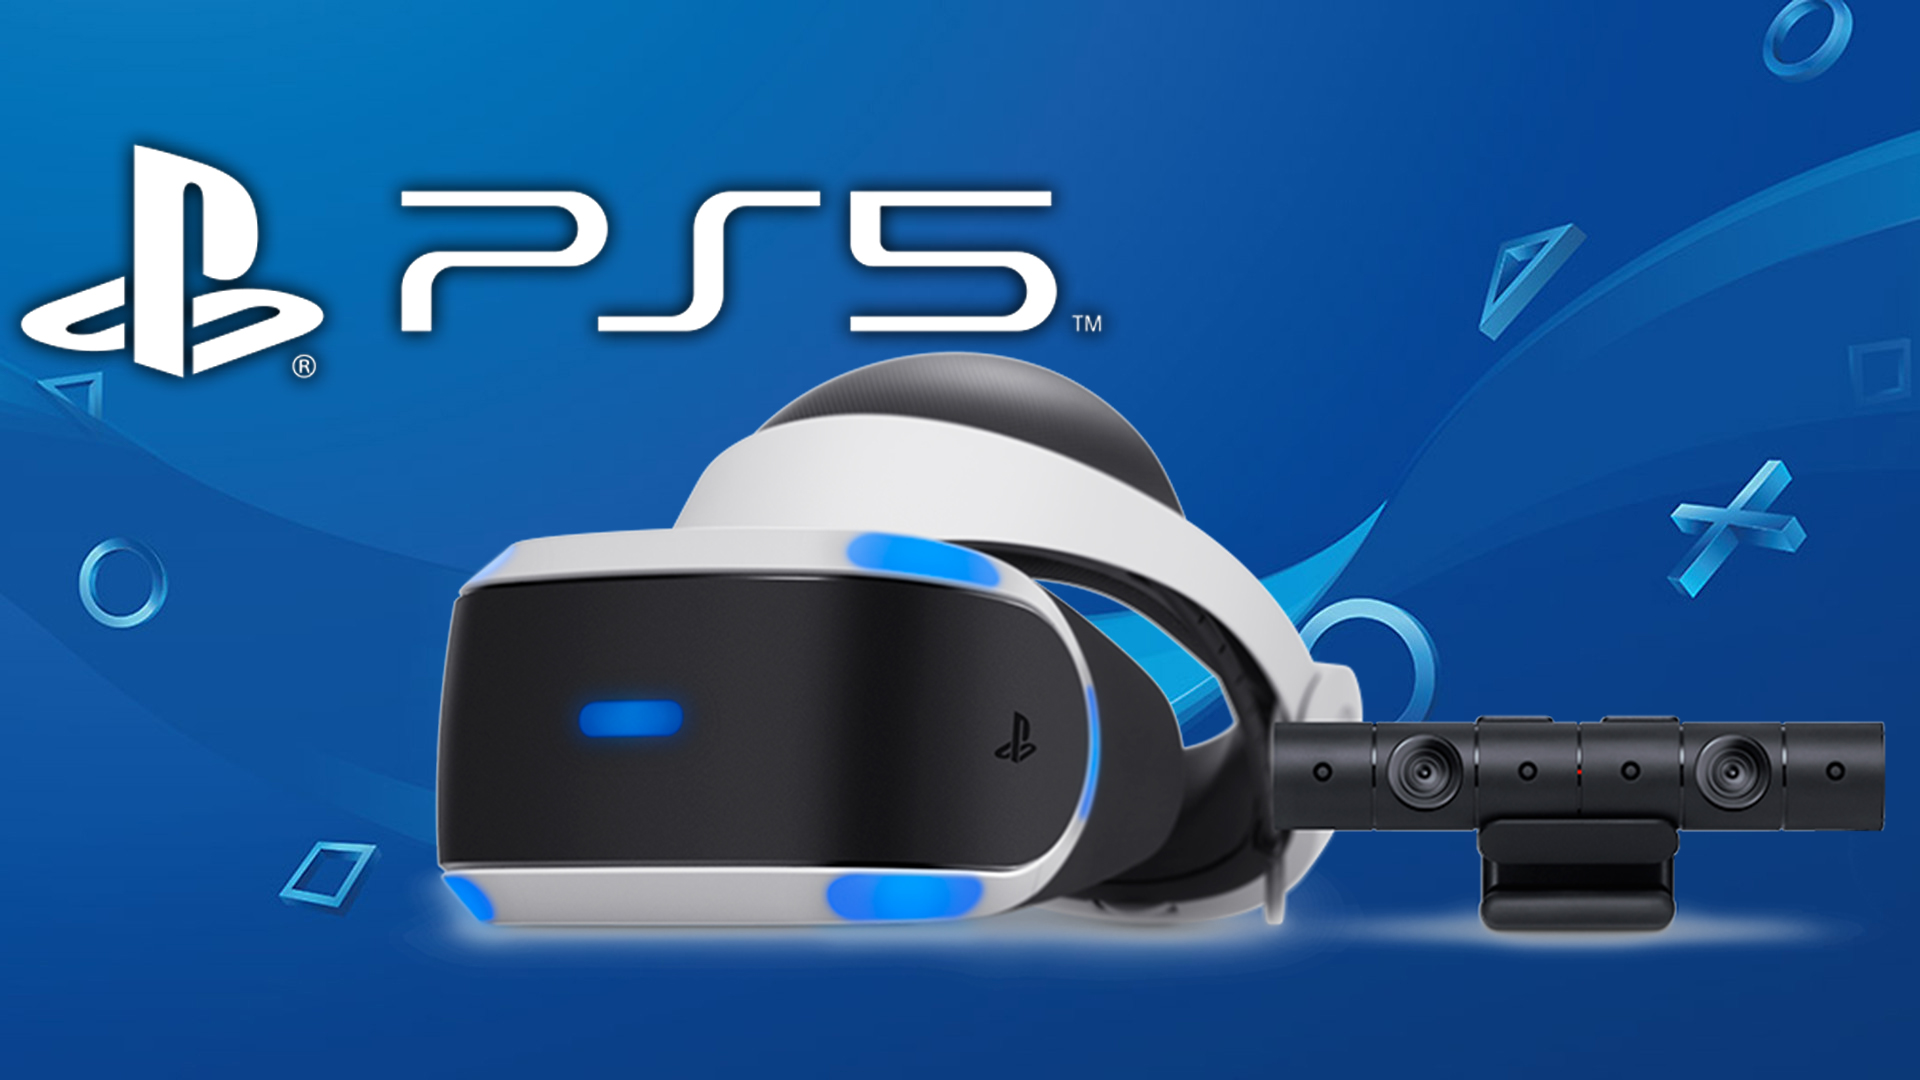 Inspireren zoogdier aankomst You Will Need Your PS4 Camera To Play Playstation VR On PS5